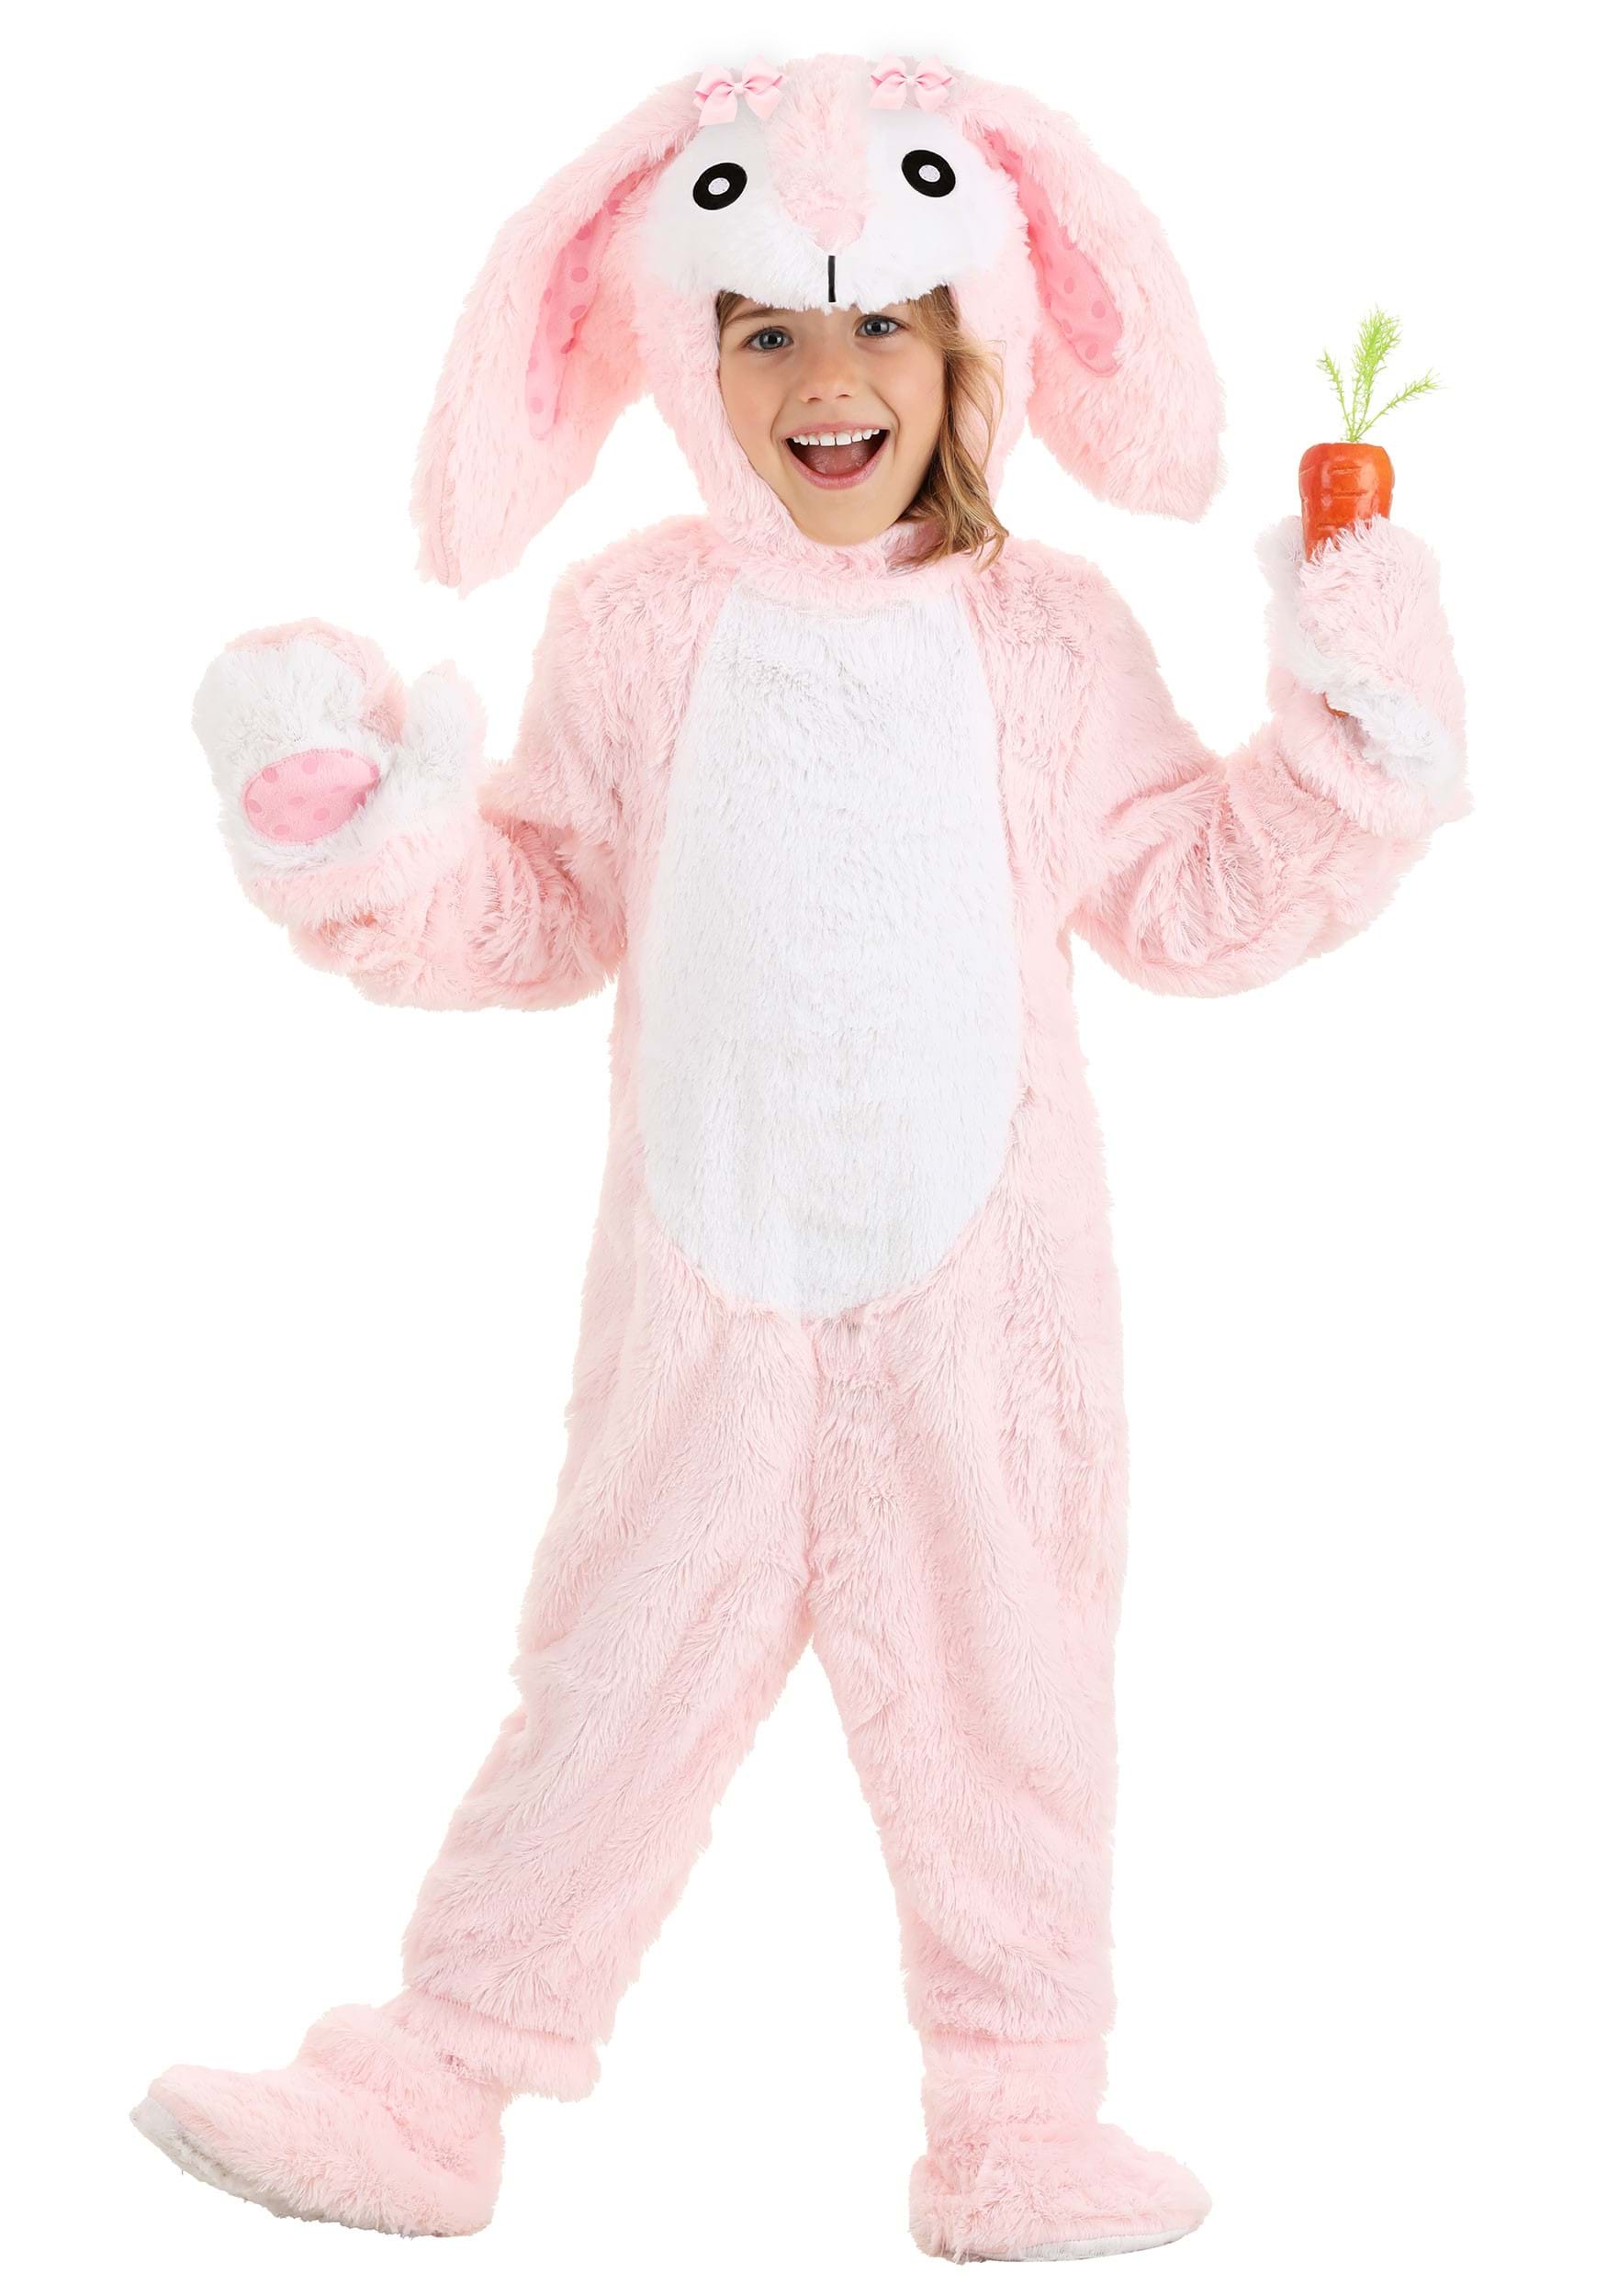 Photos - Fancy Dress Toddler FUN Costumes Exclusive  Fluffy Pink Bunny Costume Pink/White FU 